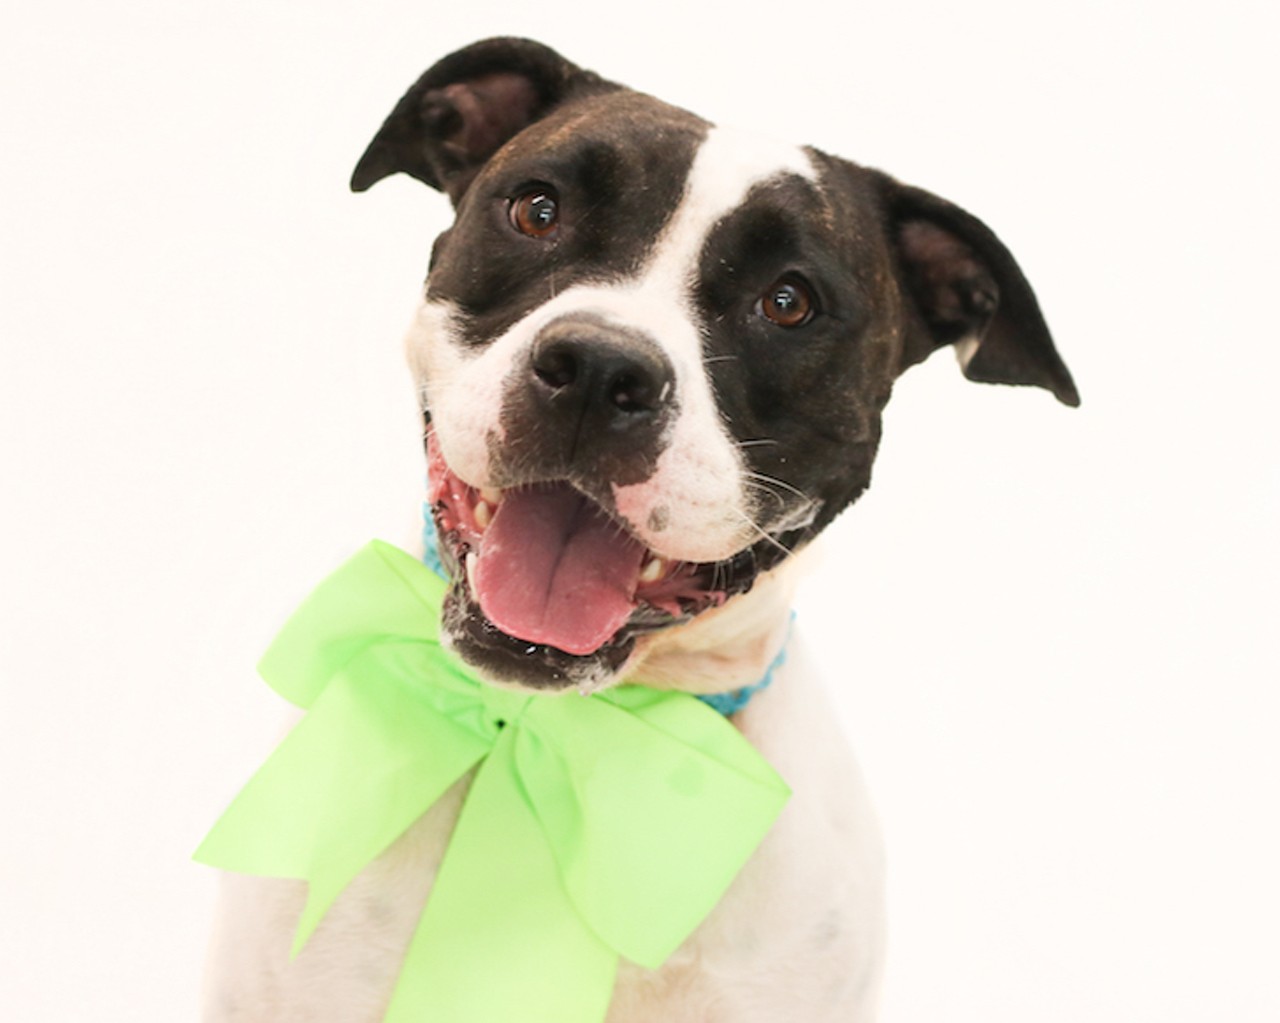 32 dapper dogs in Orange County, all dressed up to find forever homes